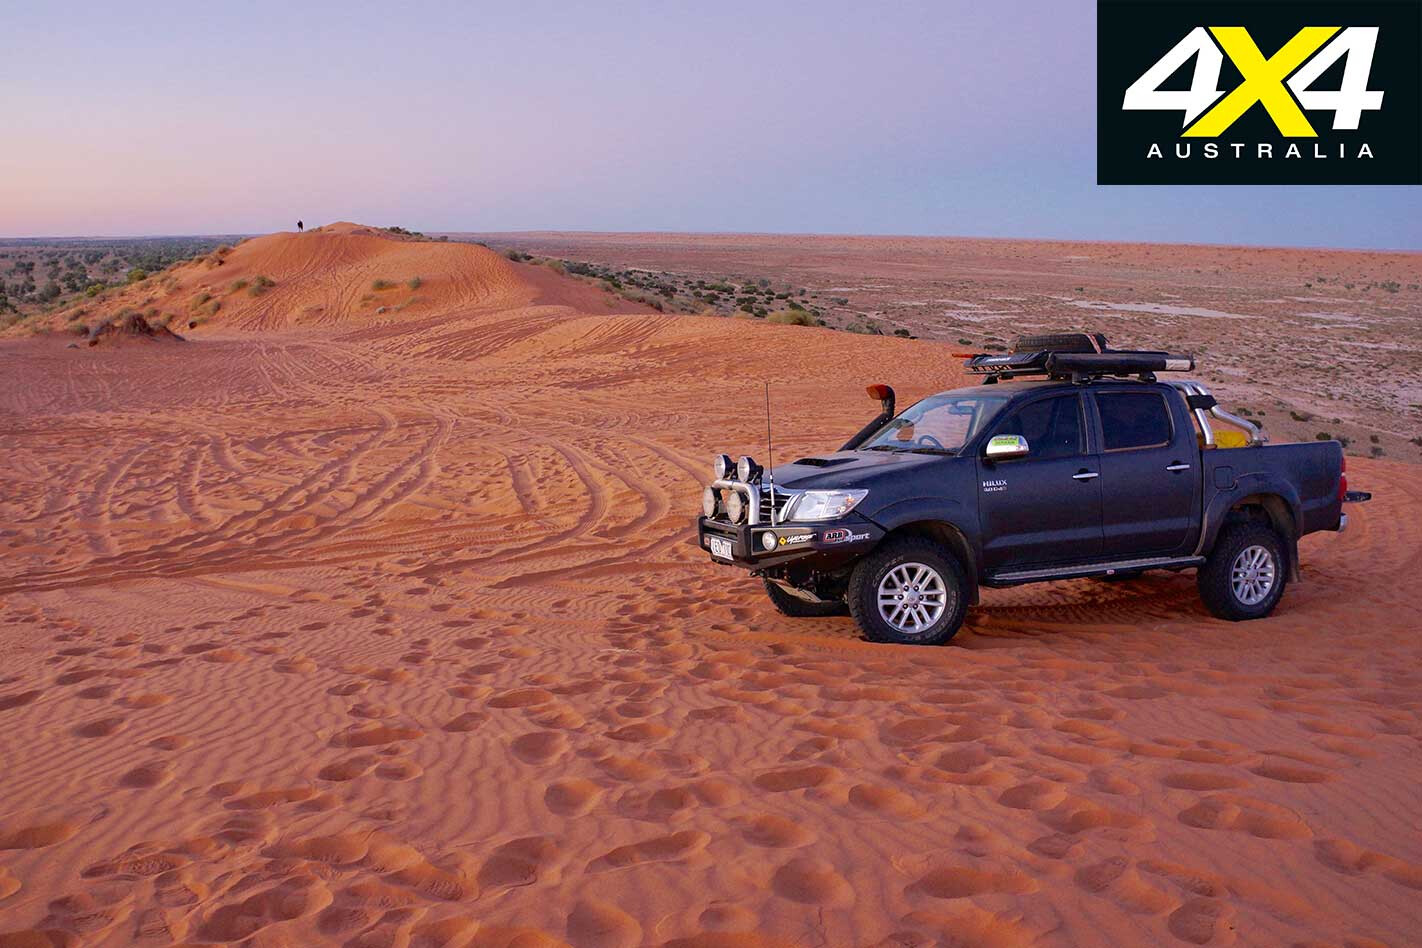 Archive Whichcar 2019 01 23 Misc 2015 Toyota Hilux 3 0 TD Simpson Desert